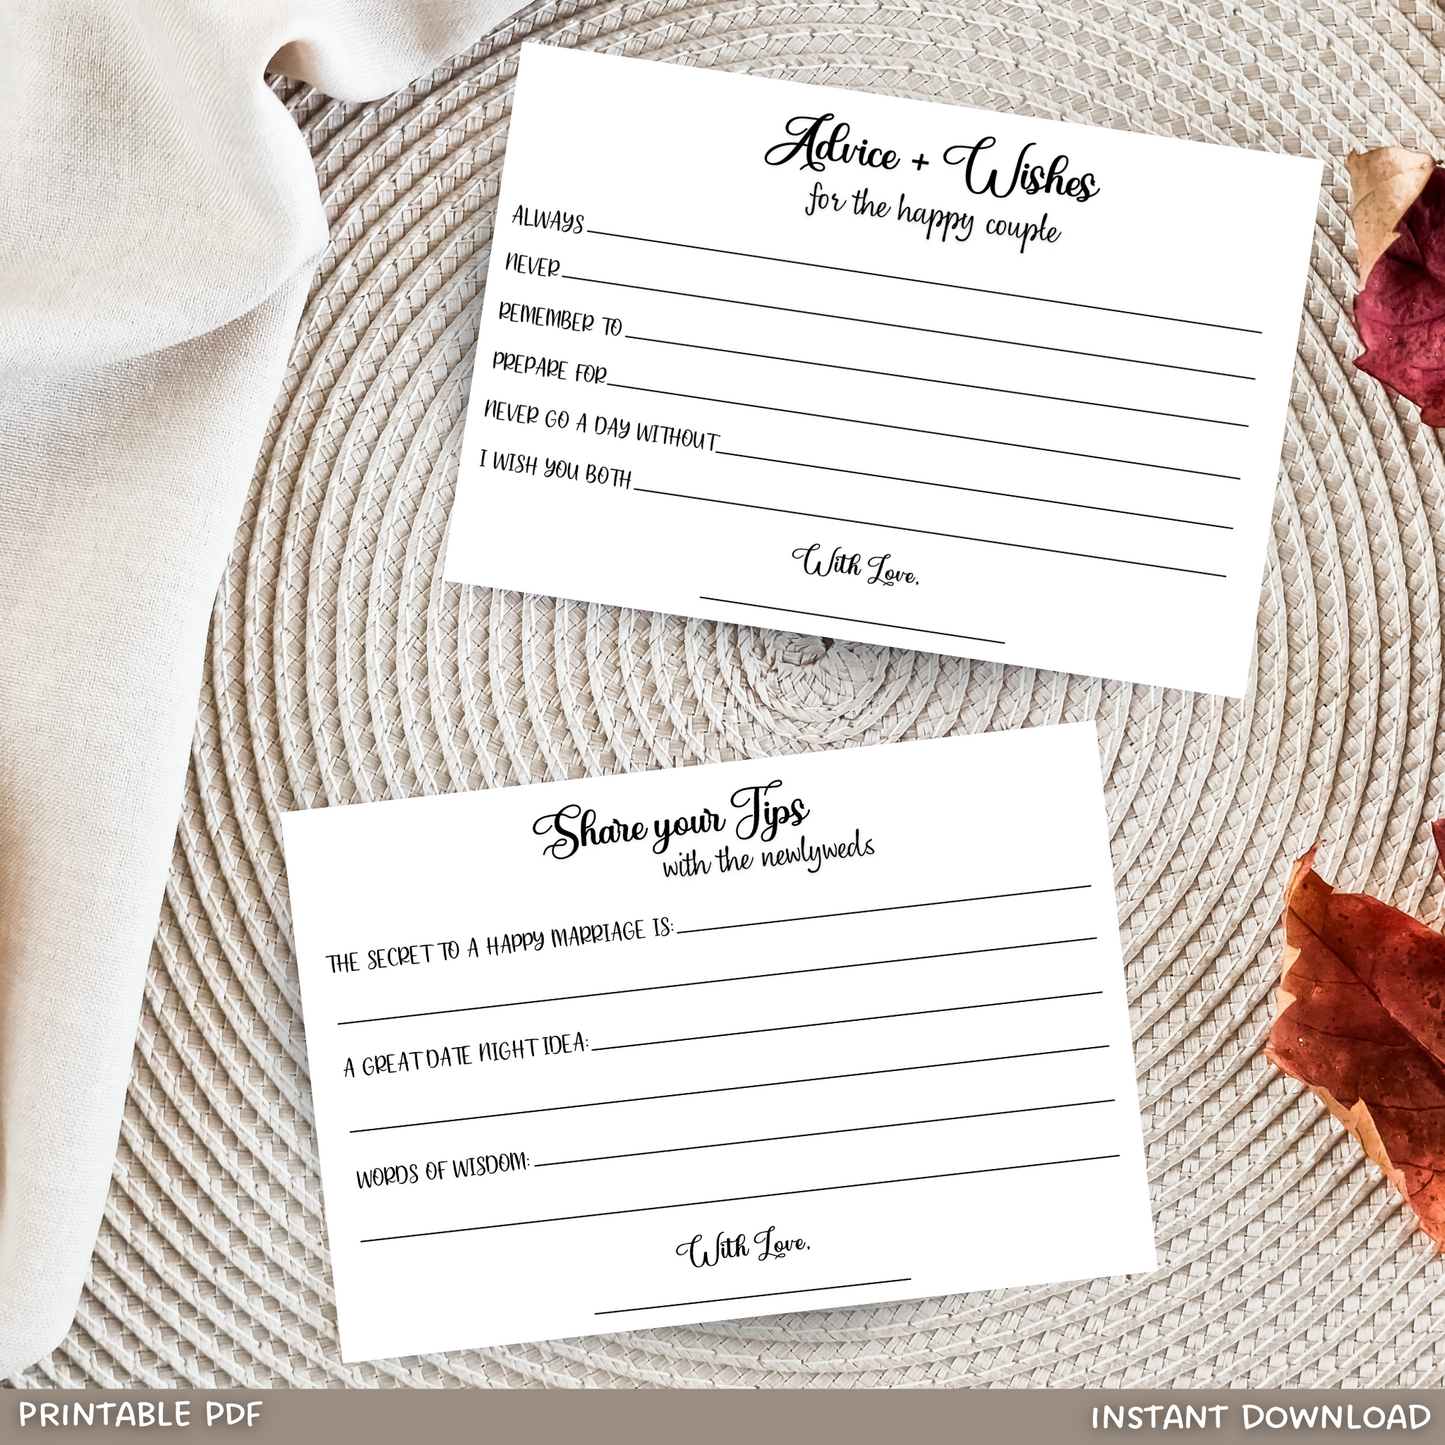 Wedding Advice & Wishes Cards, Printable Bridal Shower Party Ideas